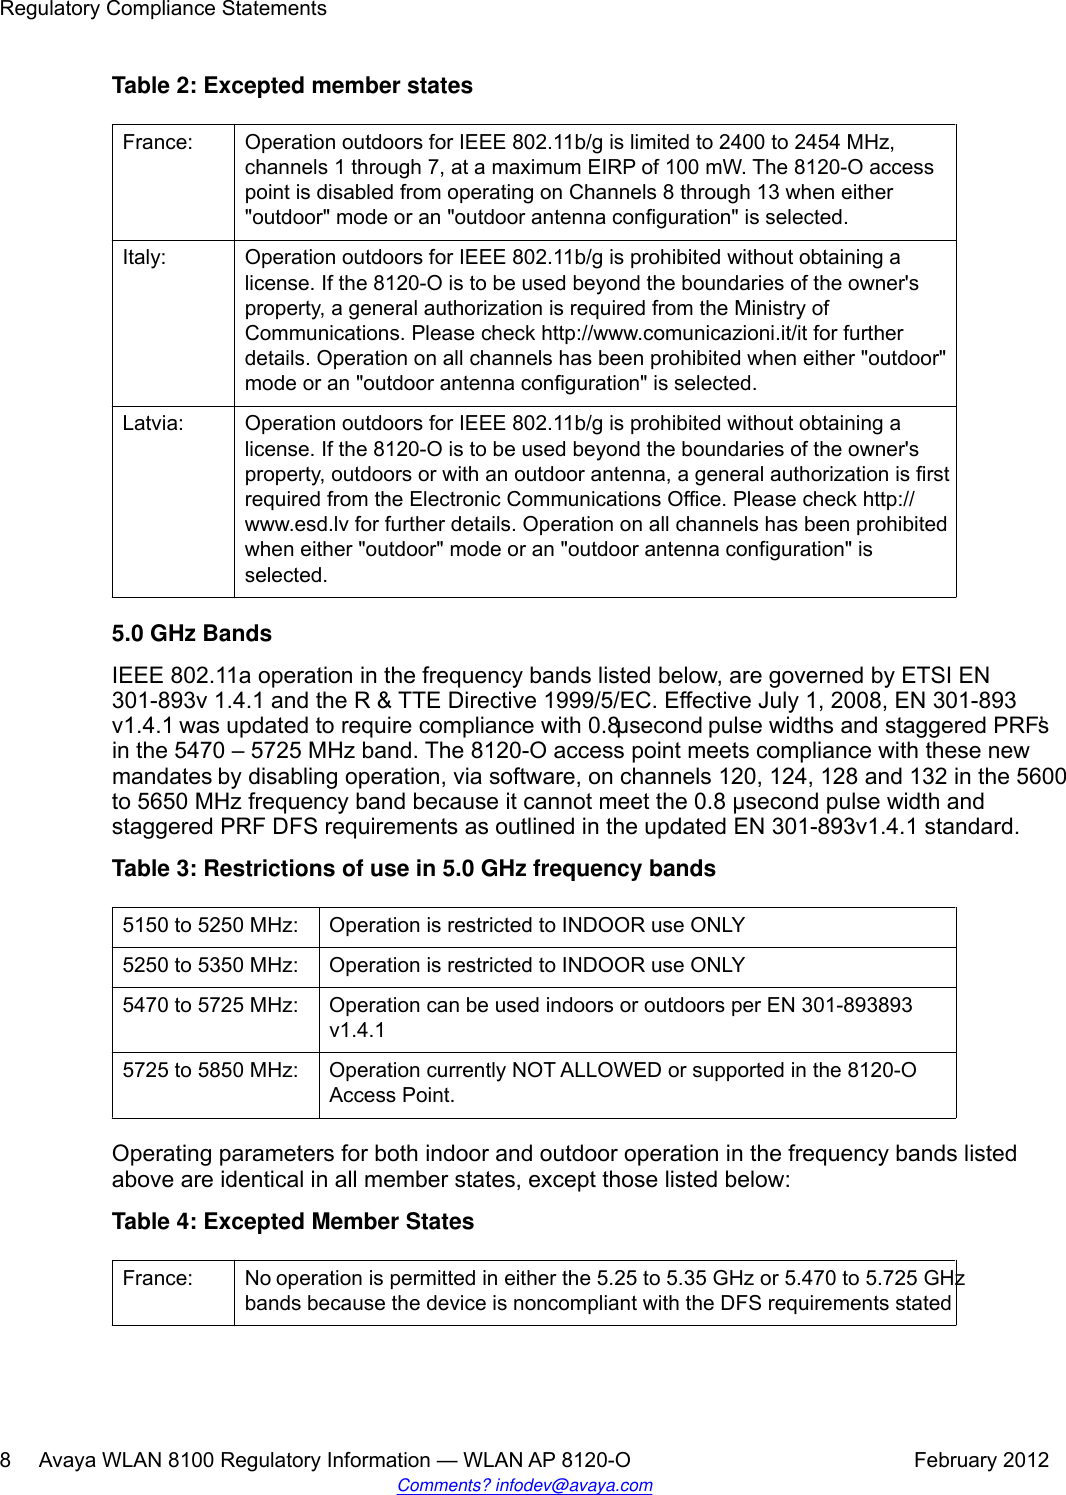 Table 2: Excepted member statesFrance: Operation outdoors for IEEE 802.11b/g is limited to 2400 to 2454 MHz,channels 1 through 7, at a maximum EIRP of 100 mW. The 8120-O accesspoint is disabled from operating on Channels 8 through 13 when either&quot;outdoor&quot; mode or an &quot;outdoor antenna configuration&quot; is selected.Italy: Operation outdoors for IEEE 802.11b/g is prohibited without obtaining alicense. If the 8120-O is to be used beyond the boundaries of the owner&apos;sproperty, a general authorization is required from the Ministry ofCommunications. Please check http://www.comunicazioni.it/it for furtherdetails. Operation on all channels has been prohibited when either &quot;outdoor&quot;mode or an &quot;outdoor antenna configuration&quot; is selected.Latvia: Operation outdoors for IEEE 802.11b/g is prohibited without obtaining alicense. If the 8120-O is to be used beyond the boundaries of the owner&apos;sproperty, outdoors or with an outdoor antenna, a general authorization is firstrequired from the Electronic Communications Office. Please check http://www.esd.lv for further details. Operation on all channels has been prohibitedwhen either &quot;outdoor&quot; mode or an &quot;outdoor antenna configuration&quot; isselected.5.0 GHz BandsIEEE 802.11a operation in the frequency bands listed below, are governed by ETSI EN301-893v 1.4.1 and the R &amp; TTE Directive 1999/5/EC. Effective July 1, 2008, EN 301-893v1.4.1 was updated to require compliance with 0.8 μsecond pulse widths and staggered PRF’sin the 5470 – 5725 MHz band. The 8120-O access point meets compliance with these newmandates by disabling operation, via software, on channels 120, 124, 128 and 132 in the 5600to 5650 MHz frequency band because it cannot meet the 0.8 μsecond pulse width andstaggered PRF DFS requirements as outlined in the updated EN 301-893v1.4.1 standard.Table 3: Restrictions of use in 5.0 GHz frequency bands5150 to 5250 MHz: Operation is restricted to INDOOR use ONLY5250 to 5350 MHz: Operation is restricted to INDOOR use ONLY5470 to 5725 MHz: Operation can be used indoors or outdoors per EN 301-893893v1.4.15725 to 5850 MHz: Operation currently NOT ALLOWED or supported in the 8120-OAccess Point.Operating parameters for both indoor and outdoor operation in the frequency bands listedabove are identical in all member states, except those listed below:Table 4: Excepted Member StatesFrance: No operation is permitted in either the 5.25 to 5.35 GHz or 5.470 to 5.725 GHzbands because the device is noncompliant with the DFS requirements statedRegulatory Compliance Statements8     Avaya WLAN 8100 Regulatory Information — WLAN AP 8120-O February 2012Comments? infodev@avaya.com